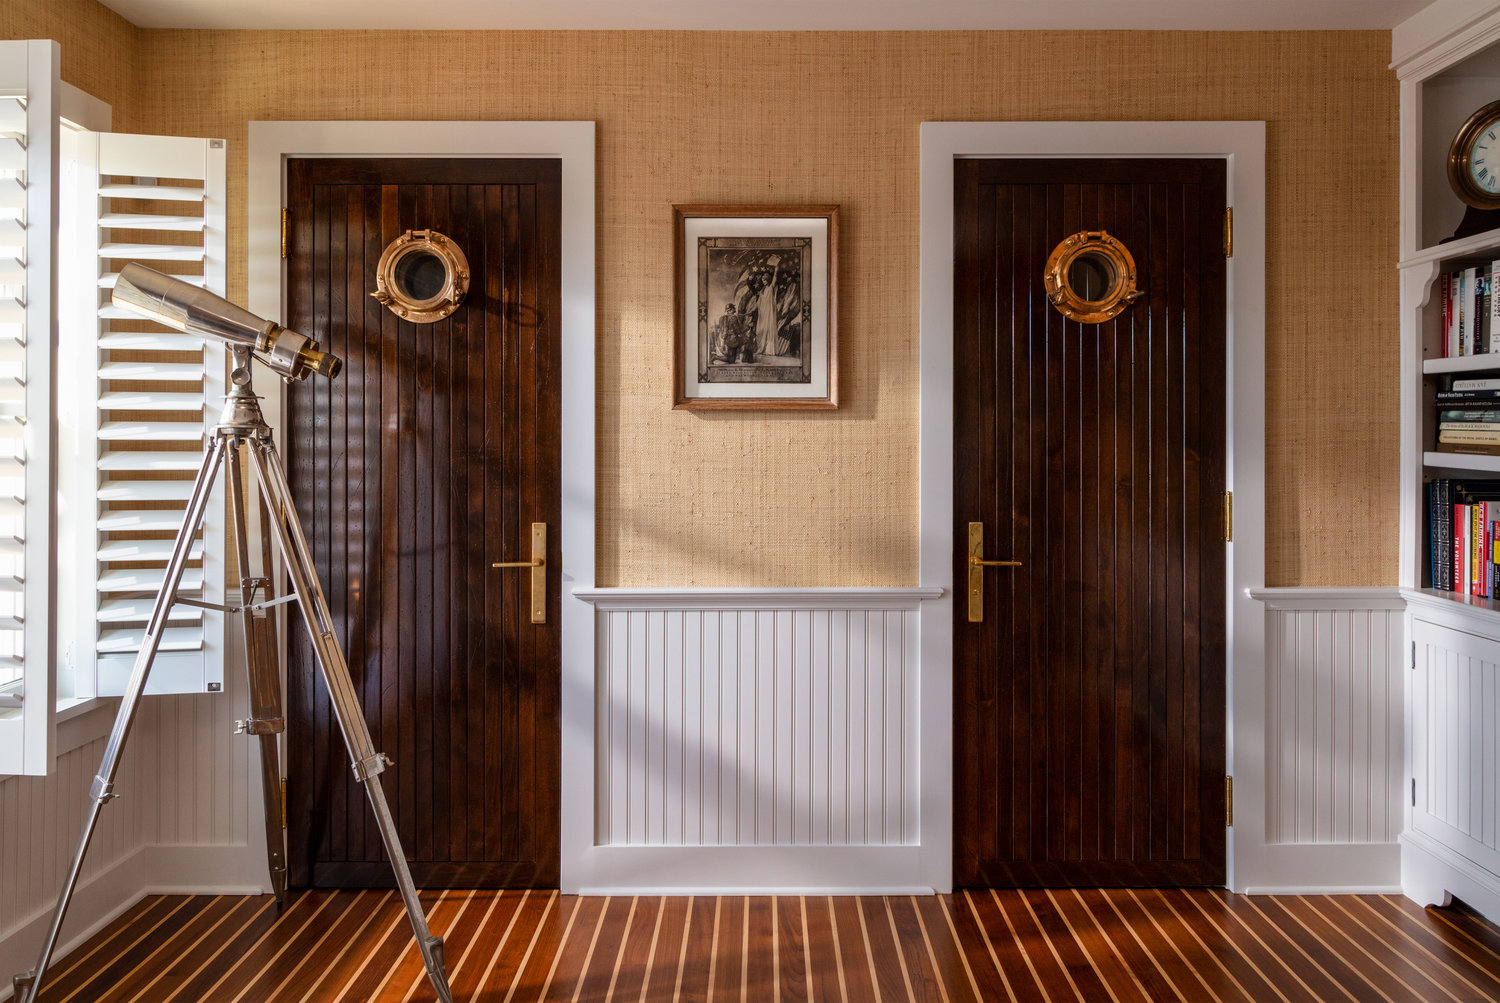 Grass-woven walls, custom lacquered teak doors with antique portholes, and teak and holly floors add up to traditional chart room style